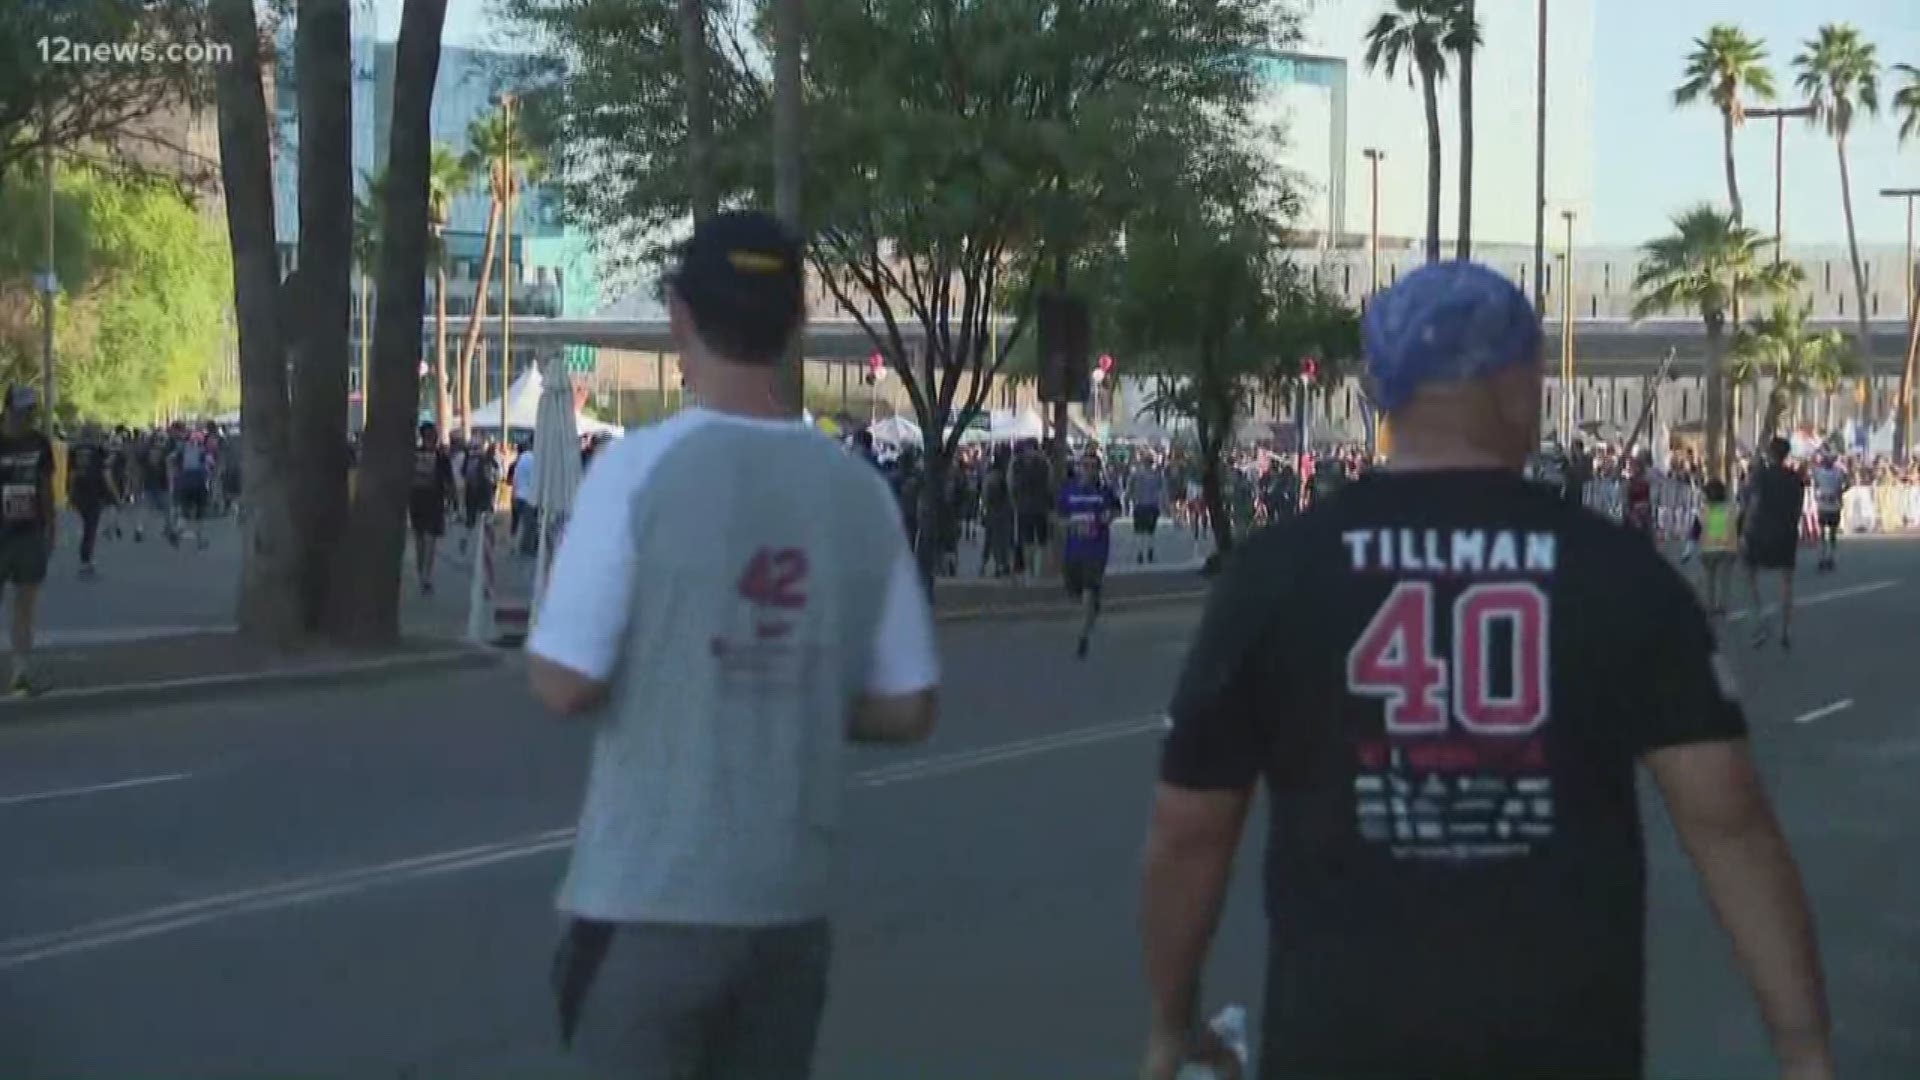 Shortly before the Pat's Run in Tempe, AZ on Sat. April 27, 2019